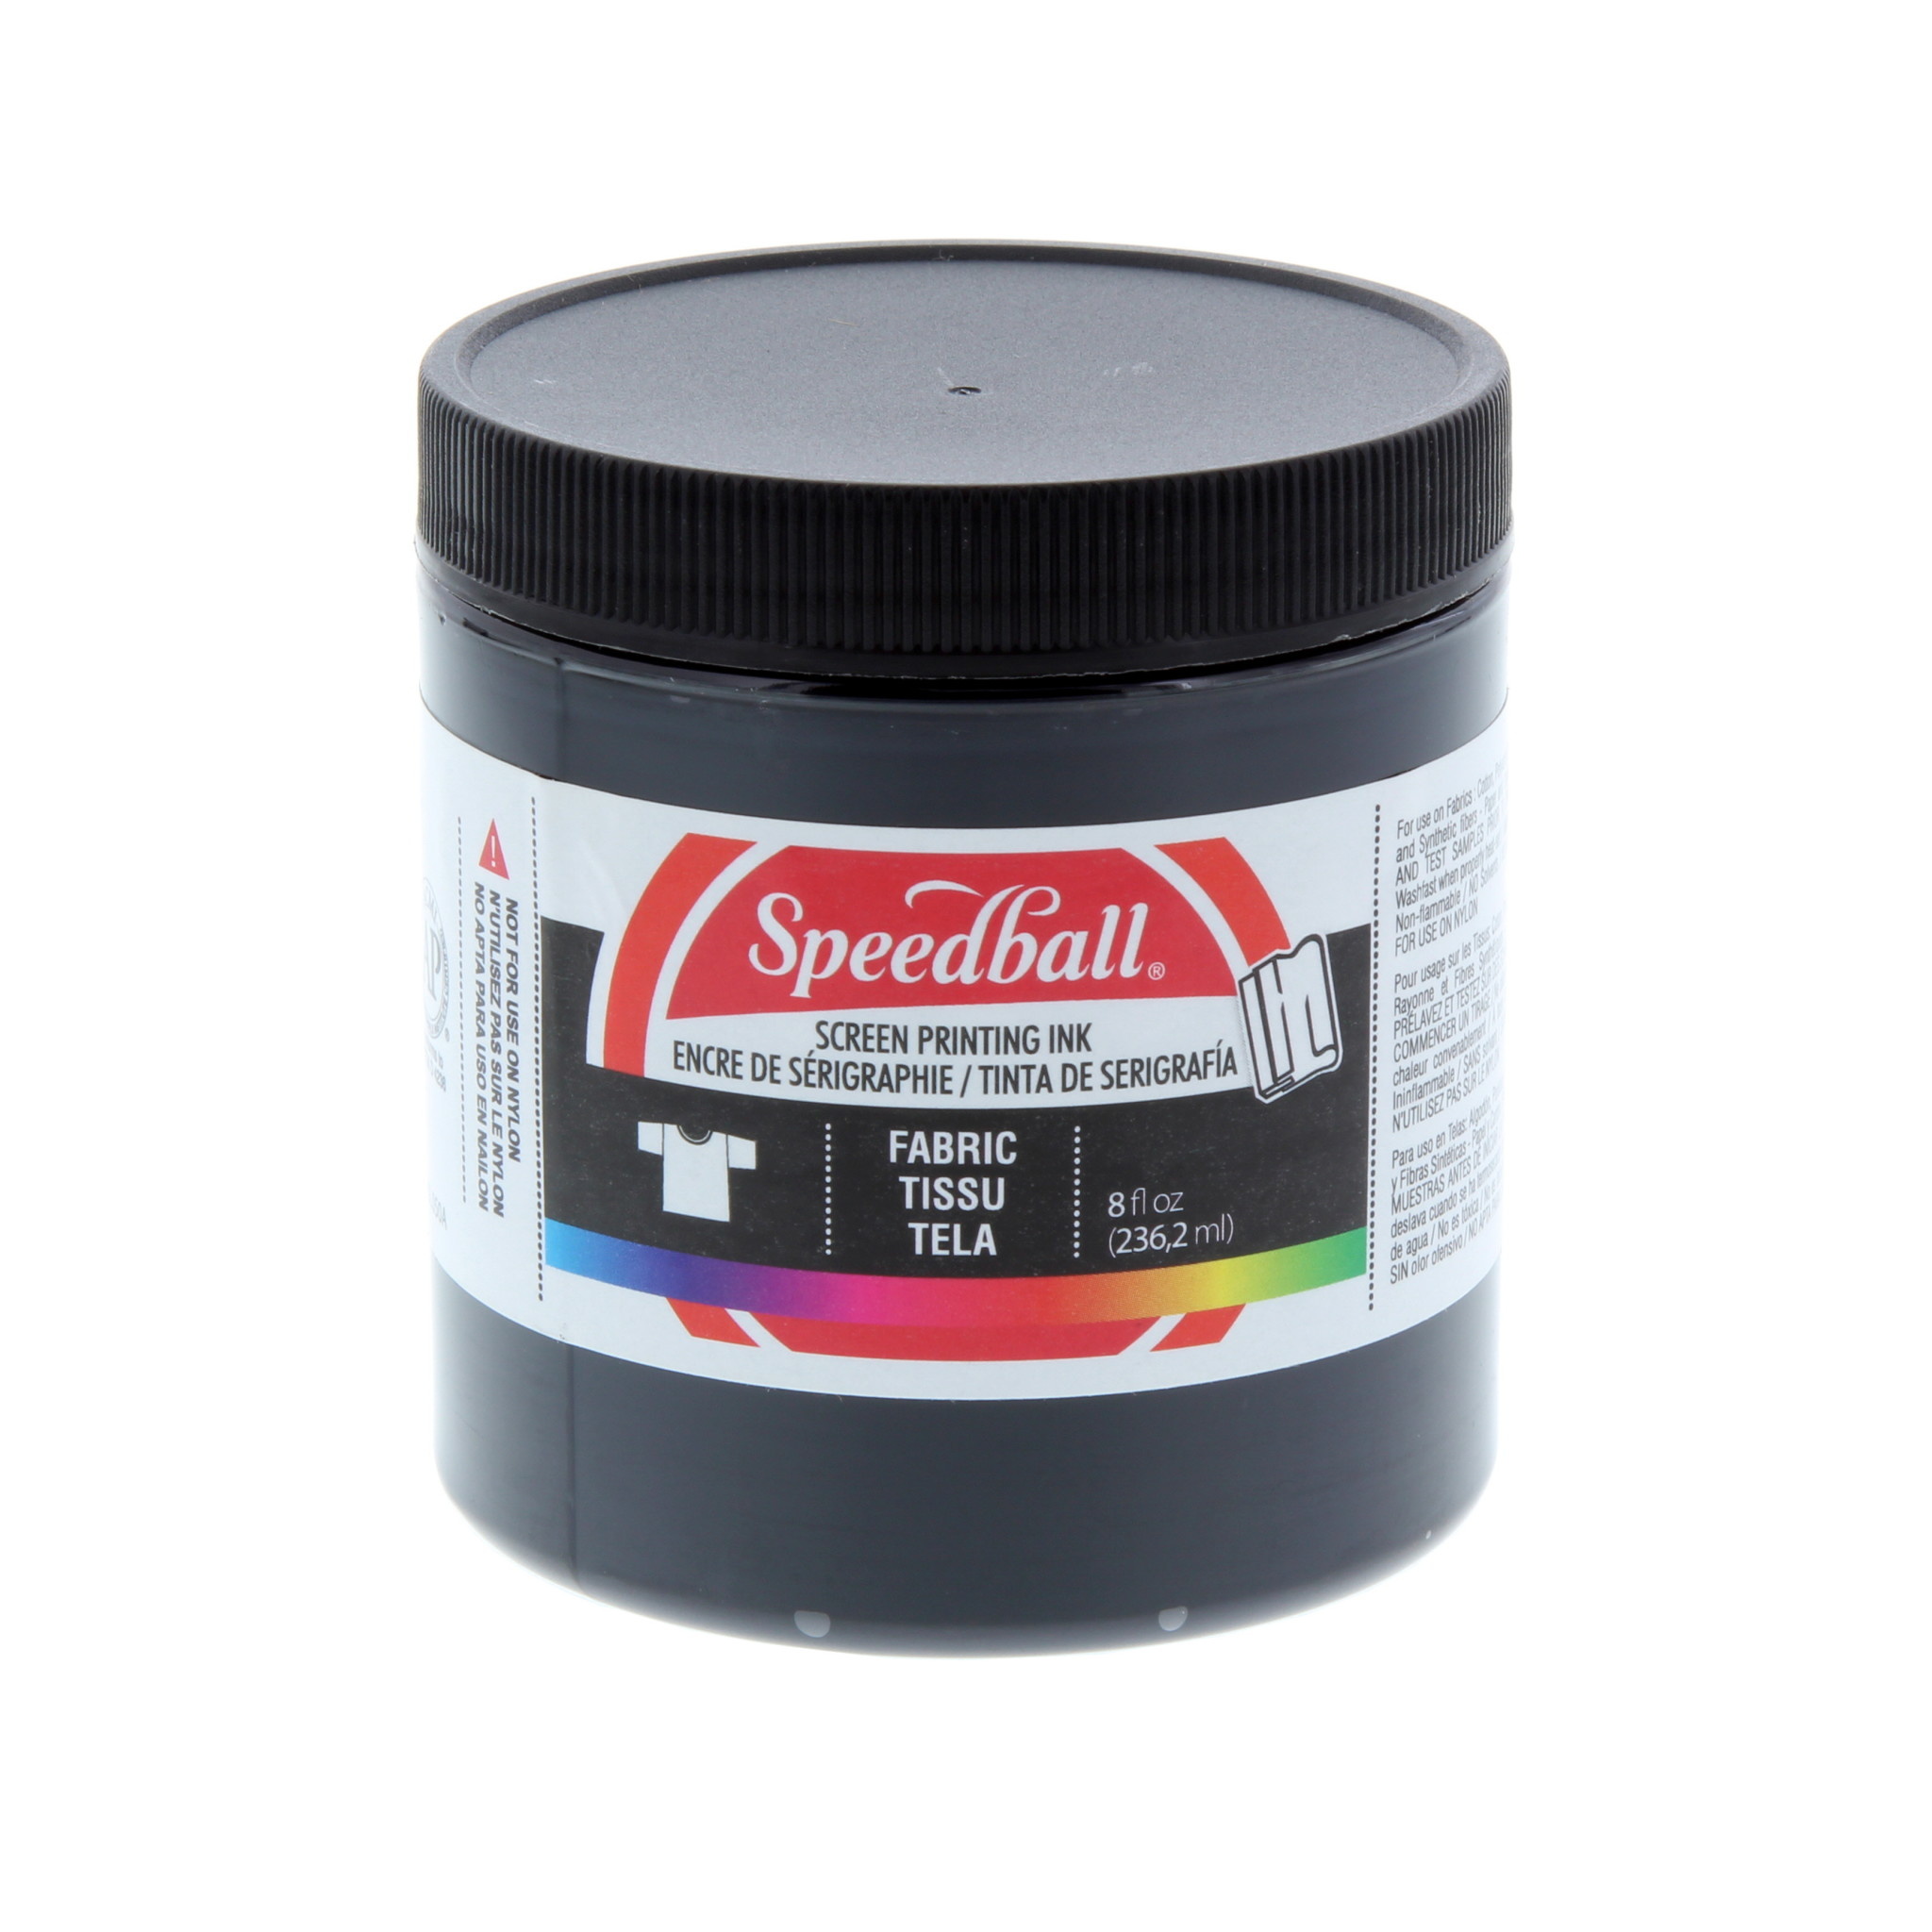 Speedball Fabric Screen Printing Ink, 8 oz. Cotton Candy Pink